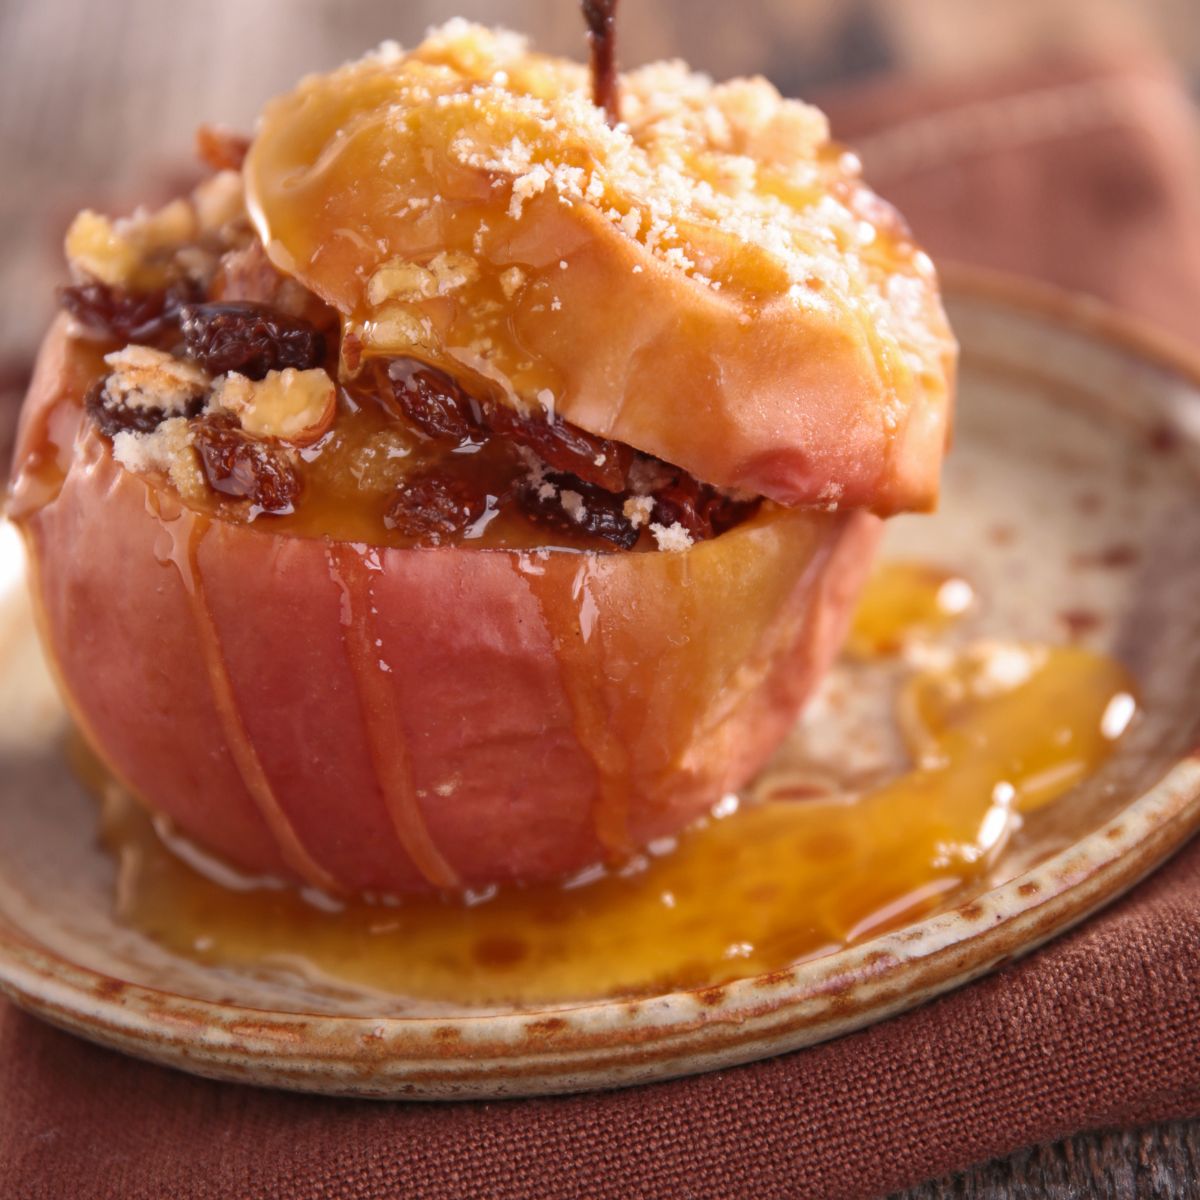 A baked apple topped with raisins, nuts and dripping with gooey sugary syrup. 